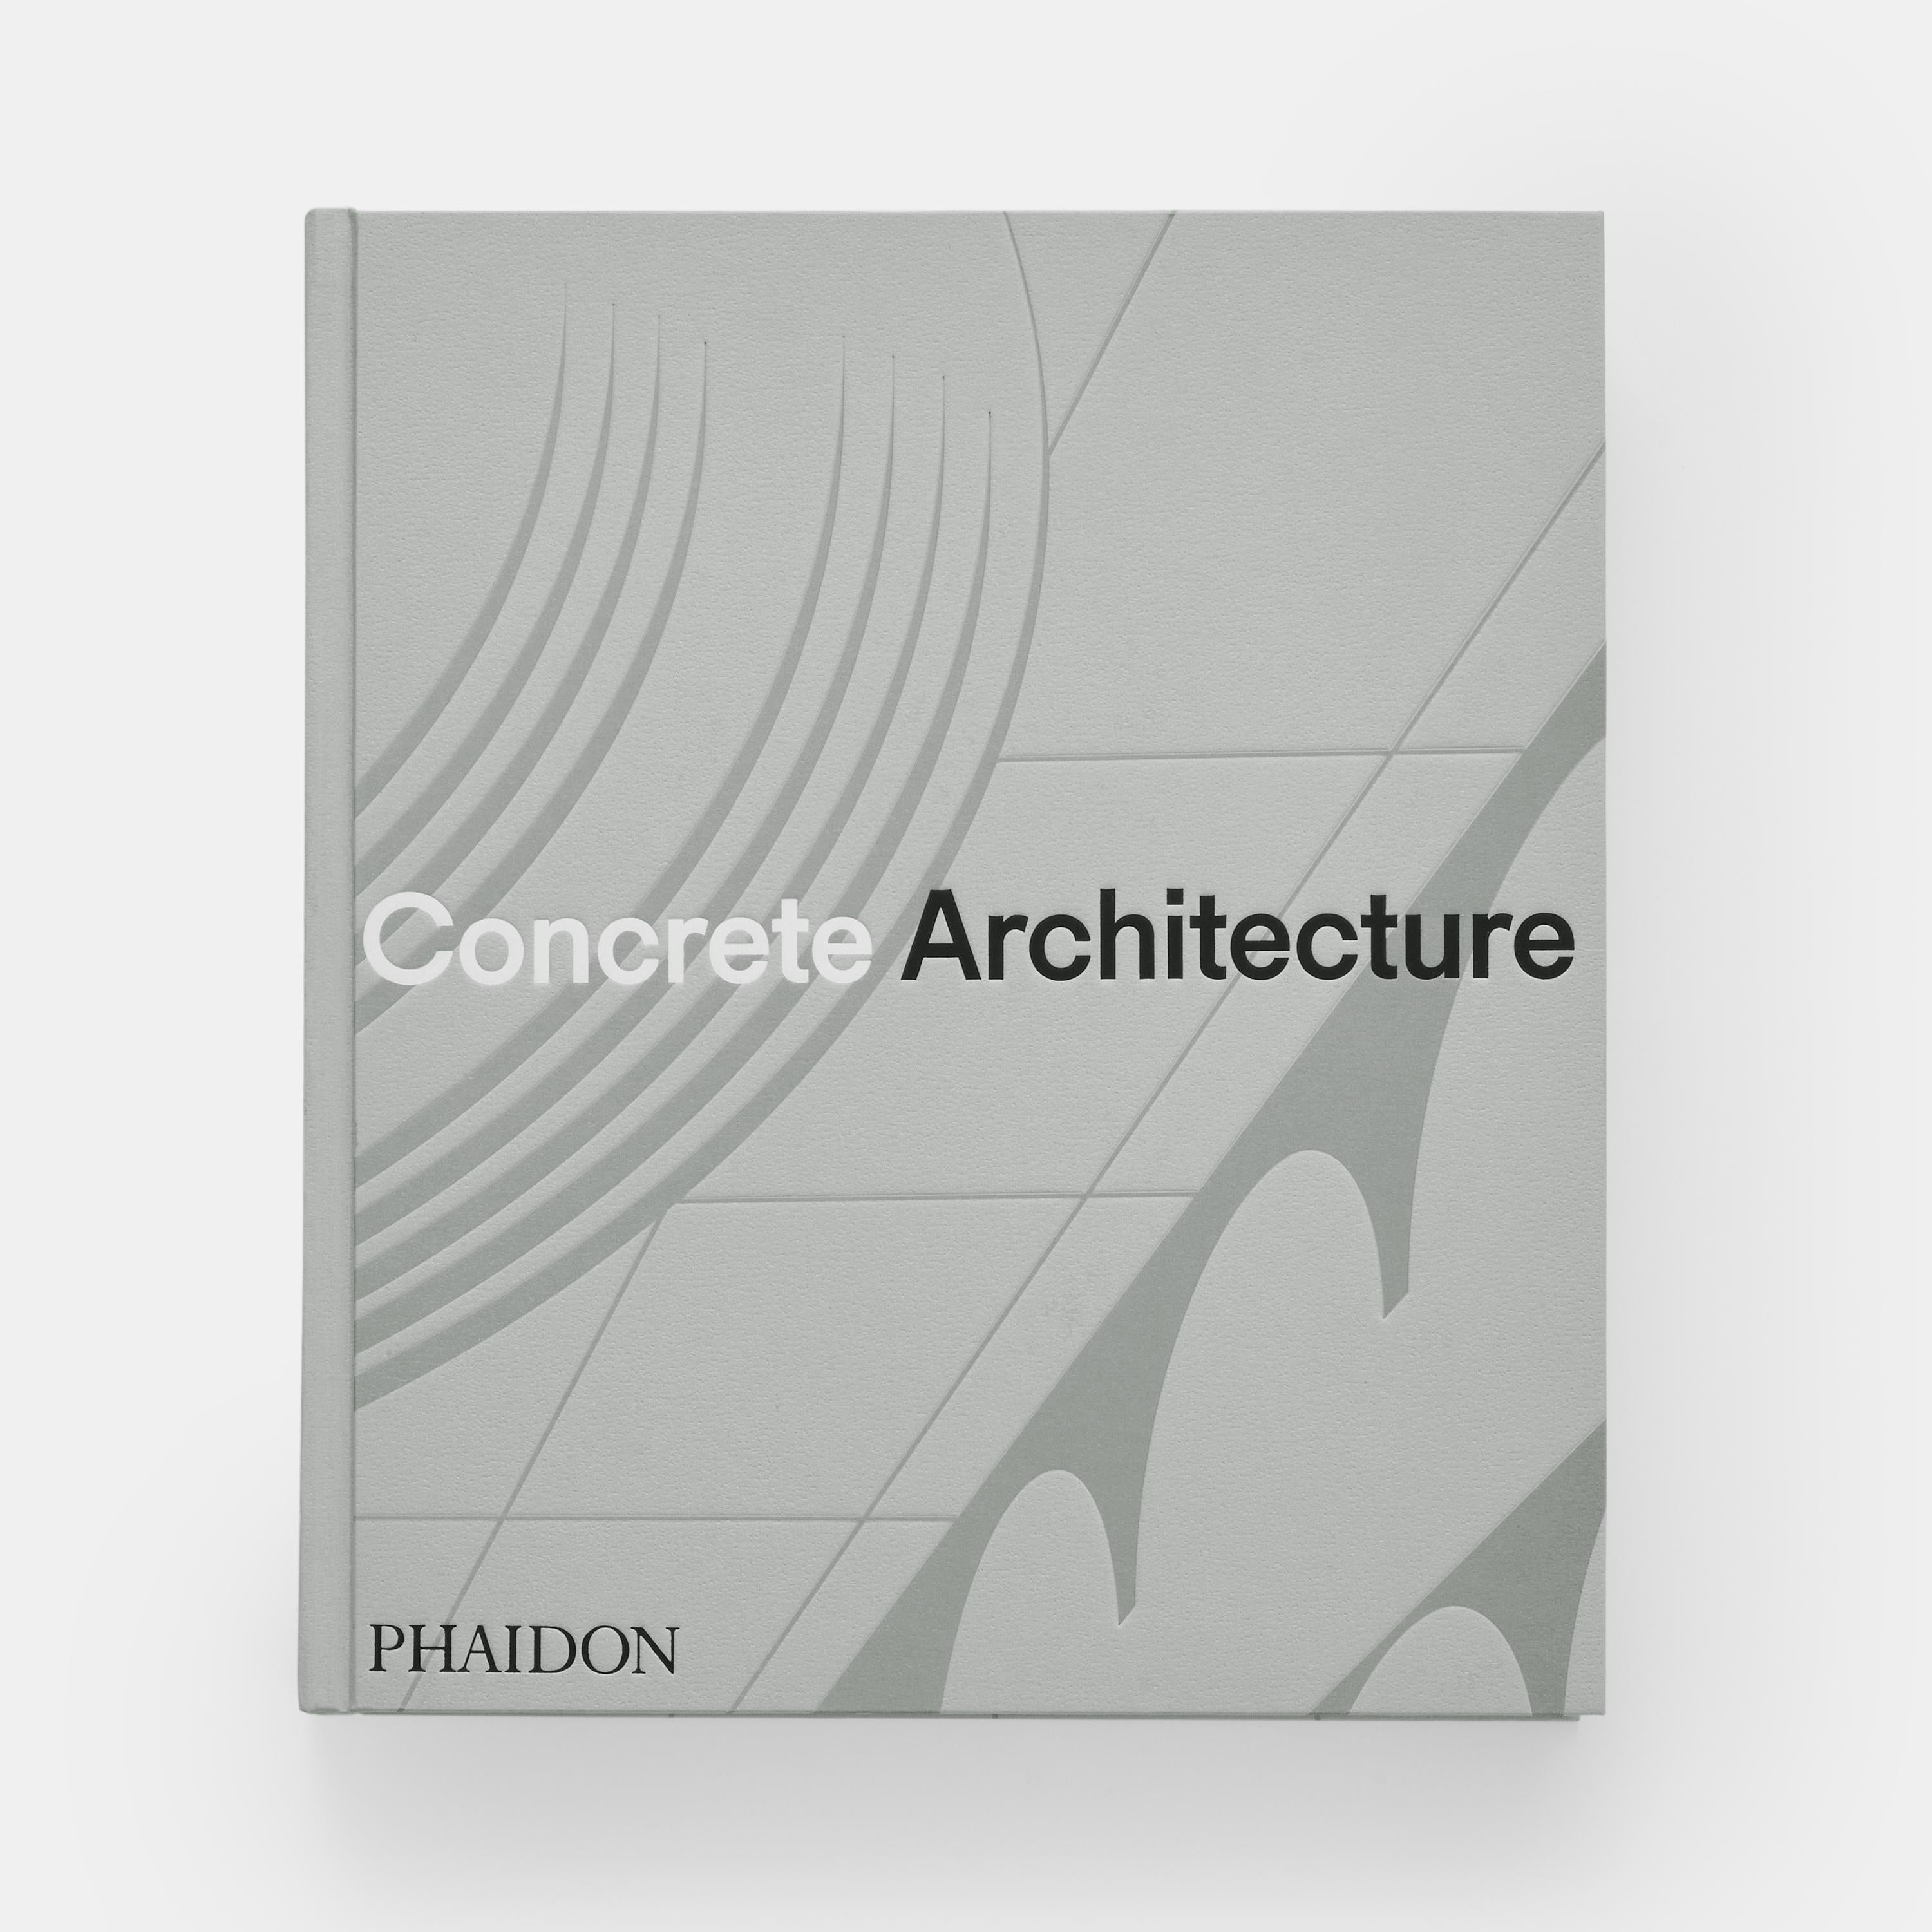 The ultimate book of concrete architecture, featuring 300 buildings of every type and style from the past 100 years

A singularly impressive volume featuring 300 examples of the most incredible and inspiring concrete architecture from the early